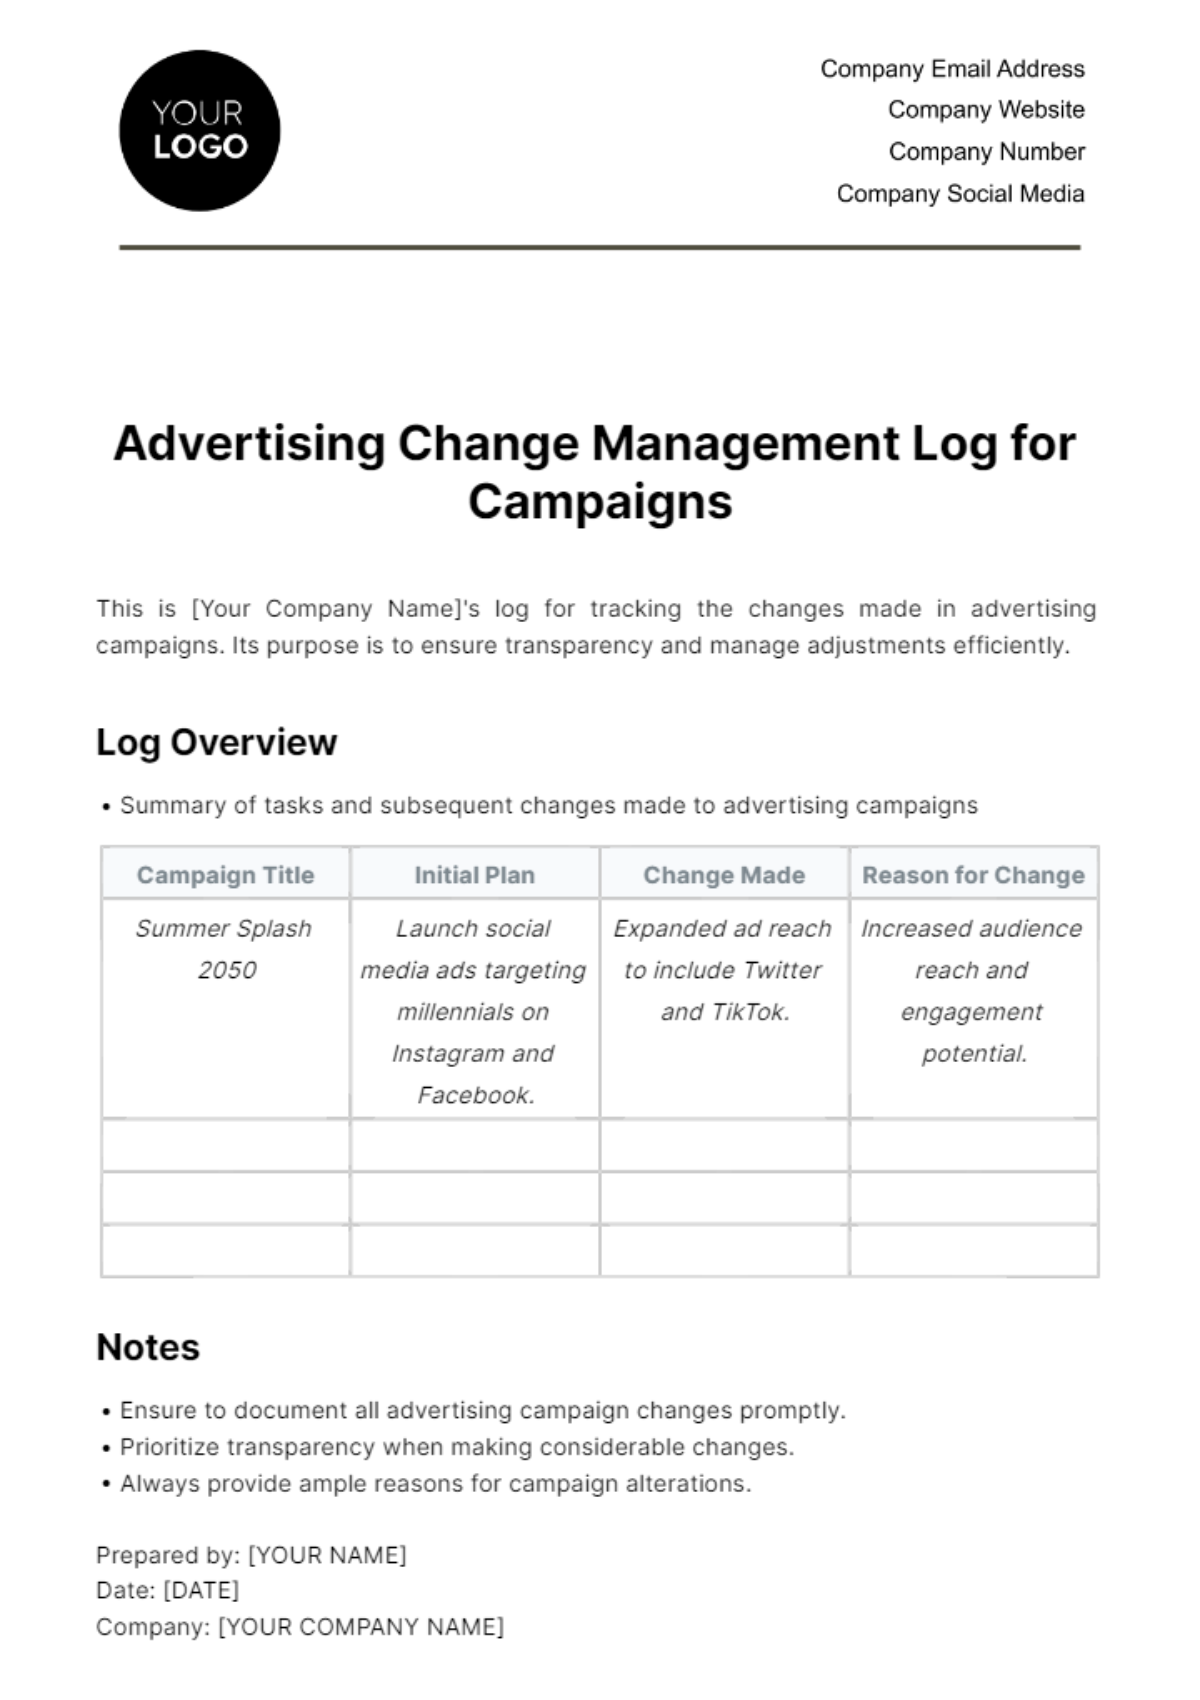 Free Advertising Change Management Log for Campaigns Template